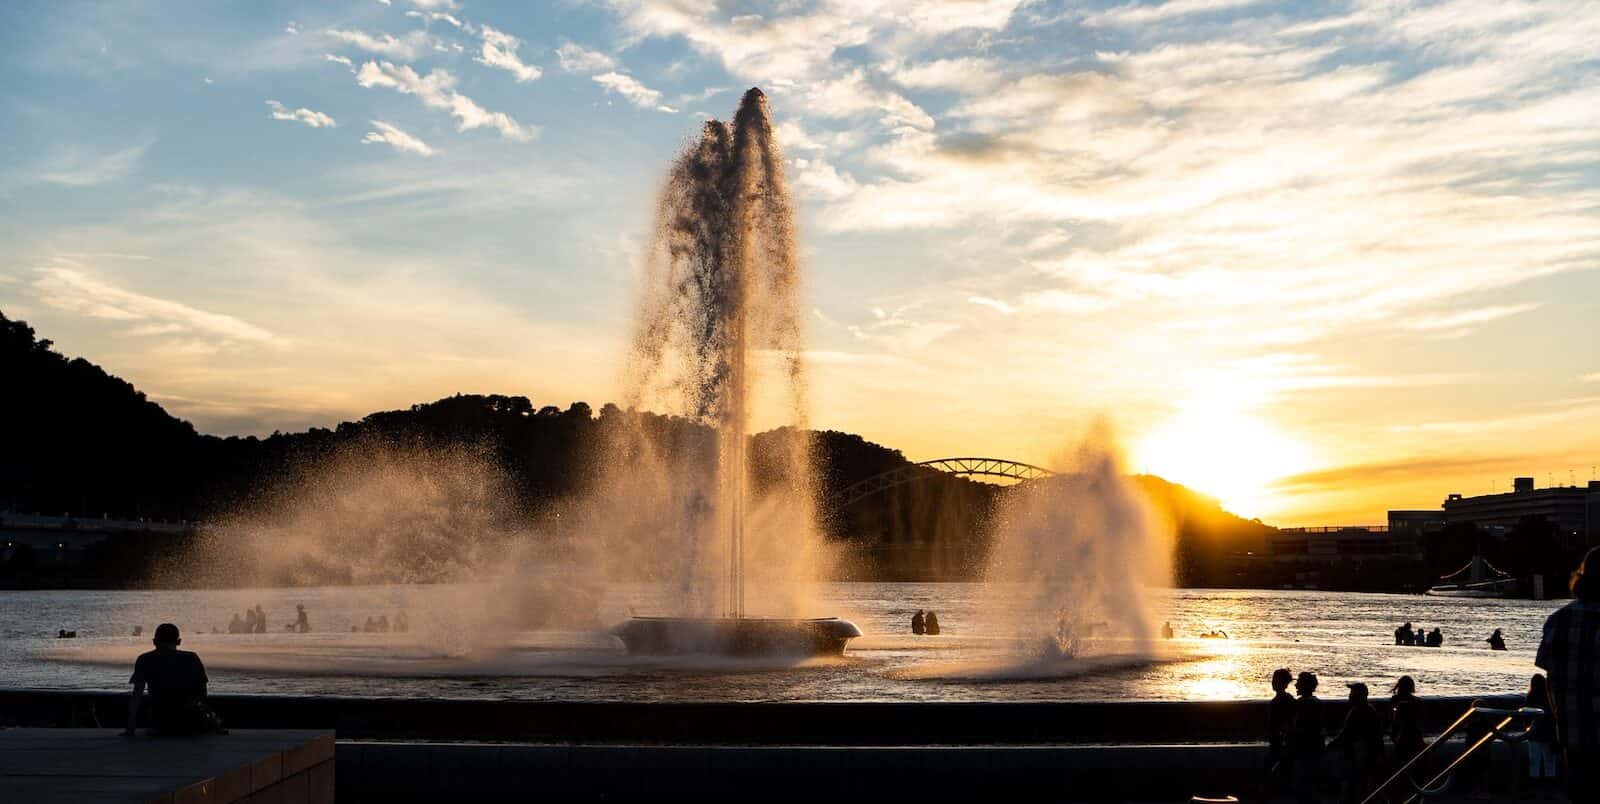 large fountain shooting water into the sky under sunset